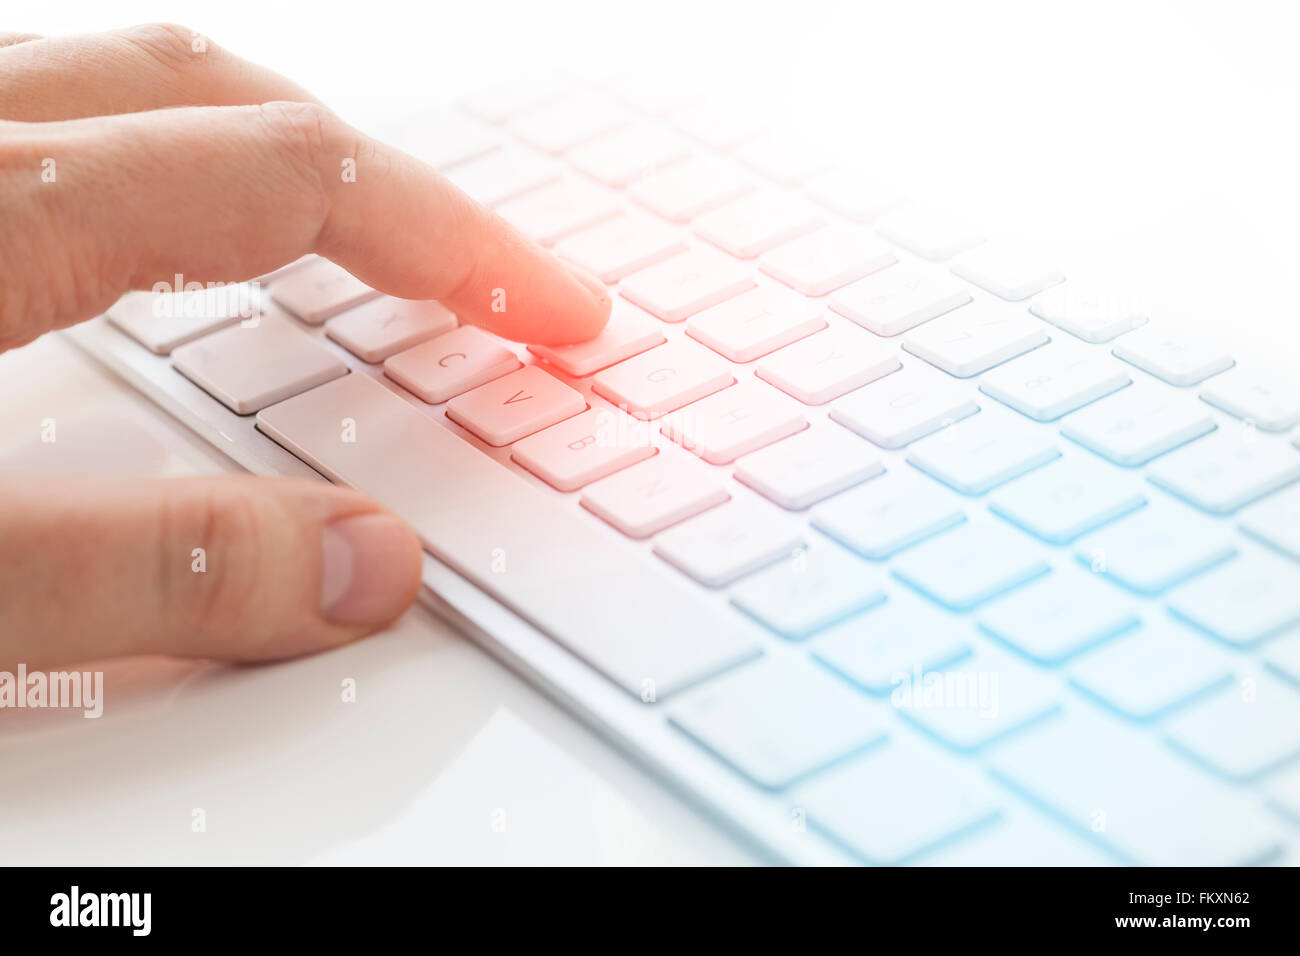 Male hand typing on computer keyboard Stock Photo